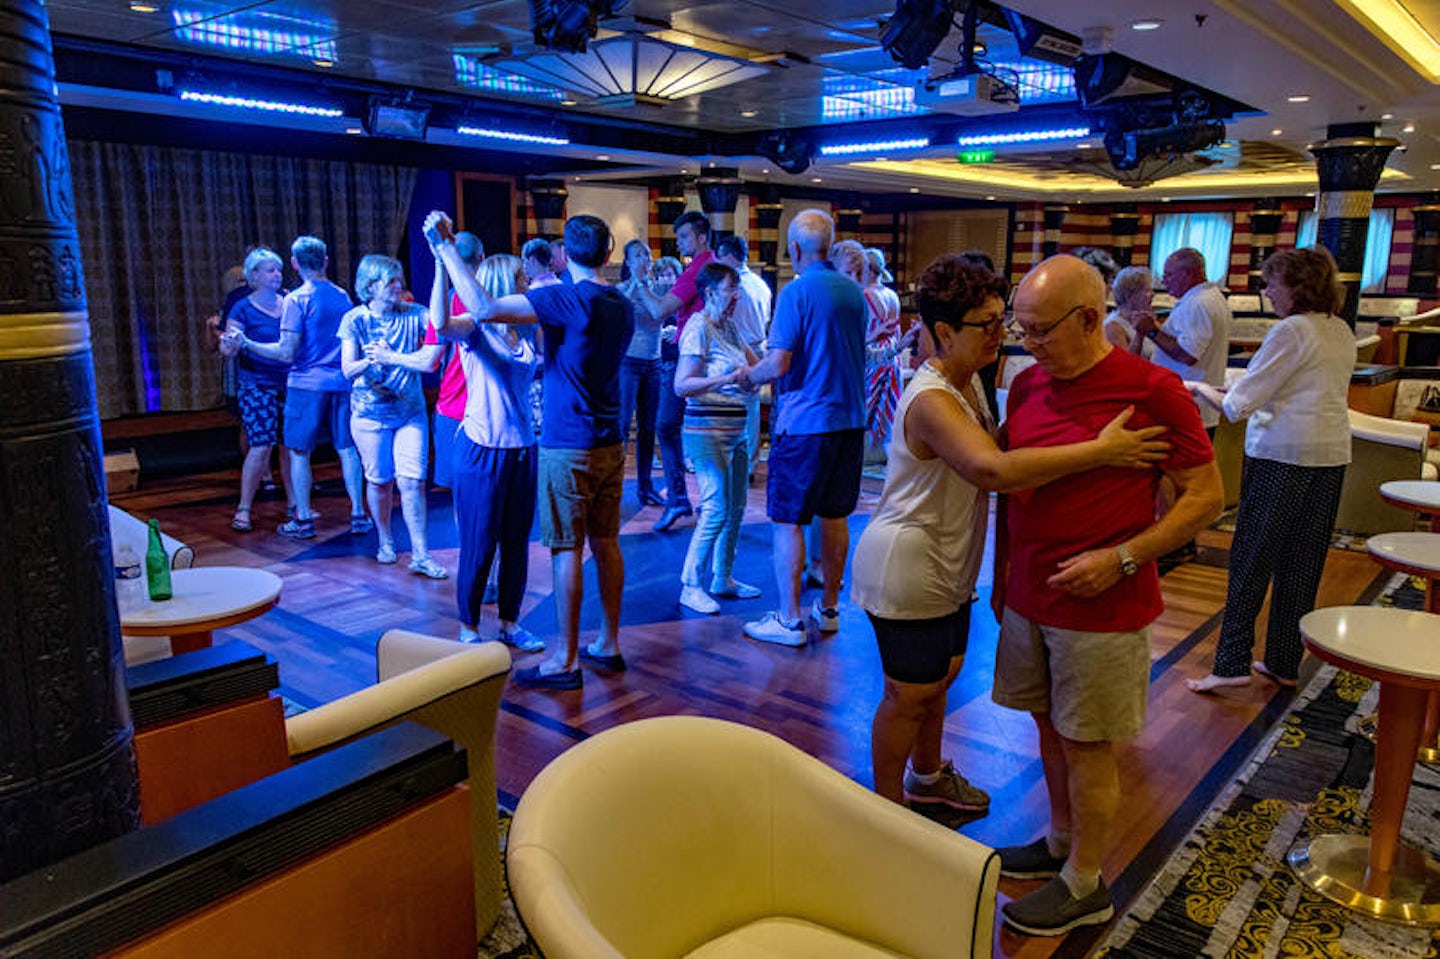 Cha Cha Cha Dance Lessons on Independence of the Seas